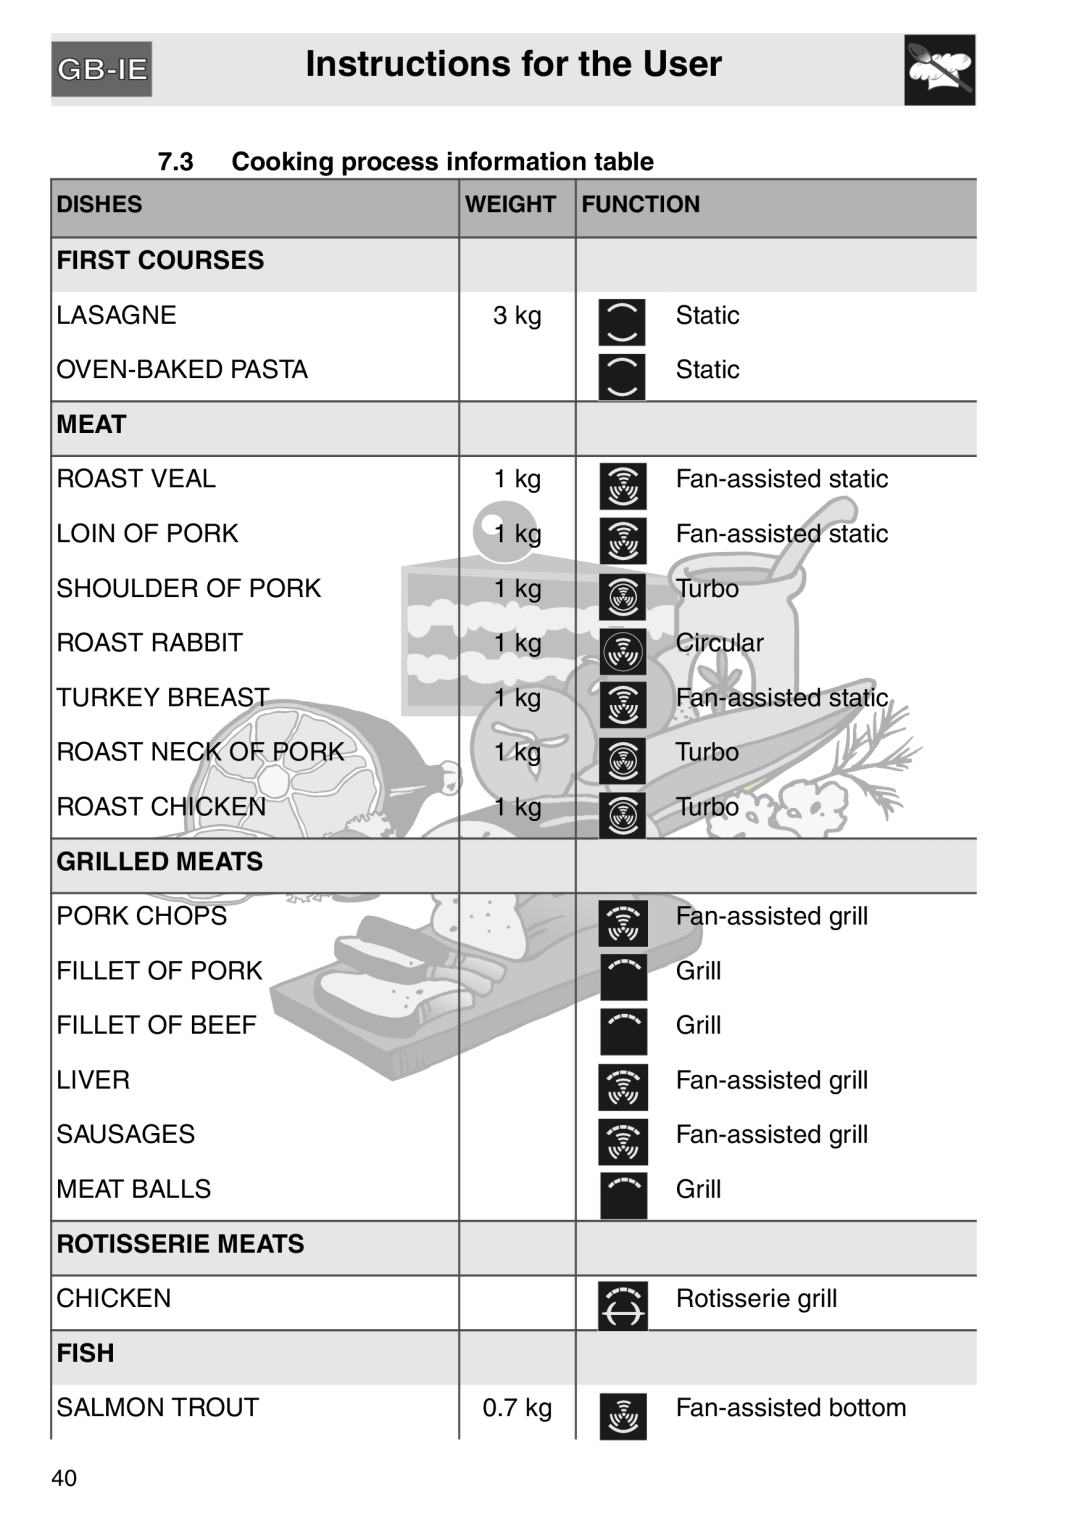 Smeg SAP112-8 Instructions for the User, 7.3Cooking process information table, First Courses, Grilled Meats, Fish 